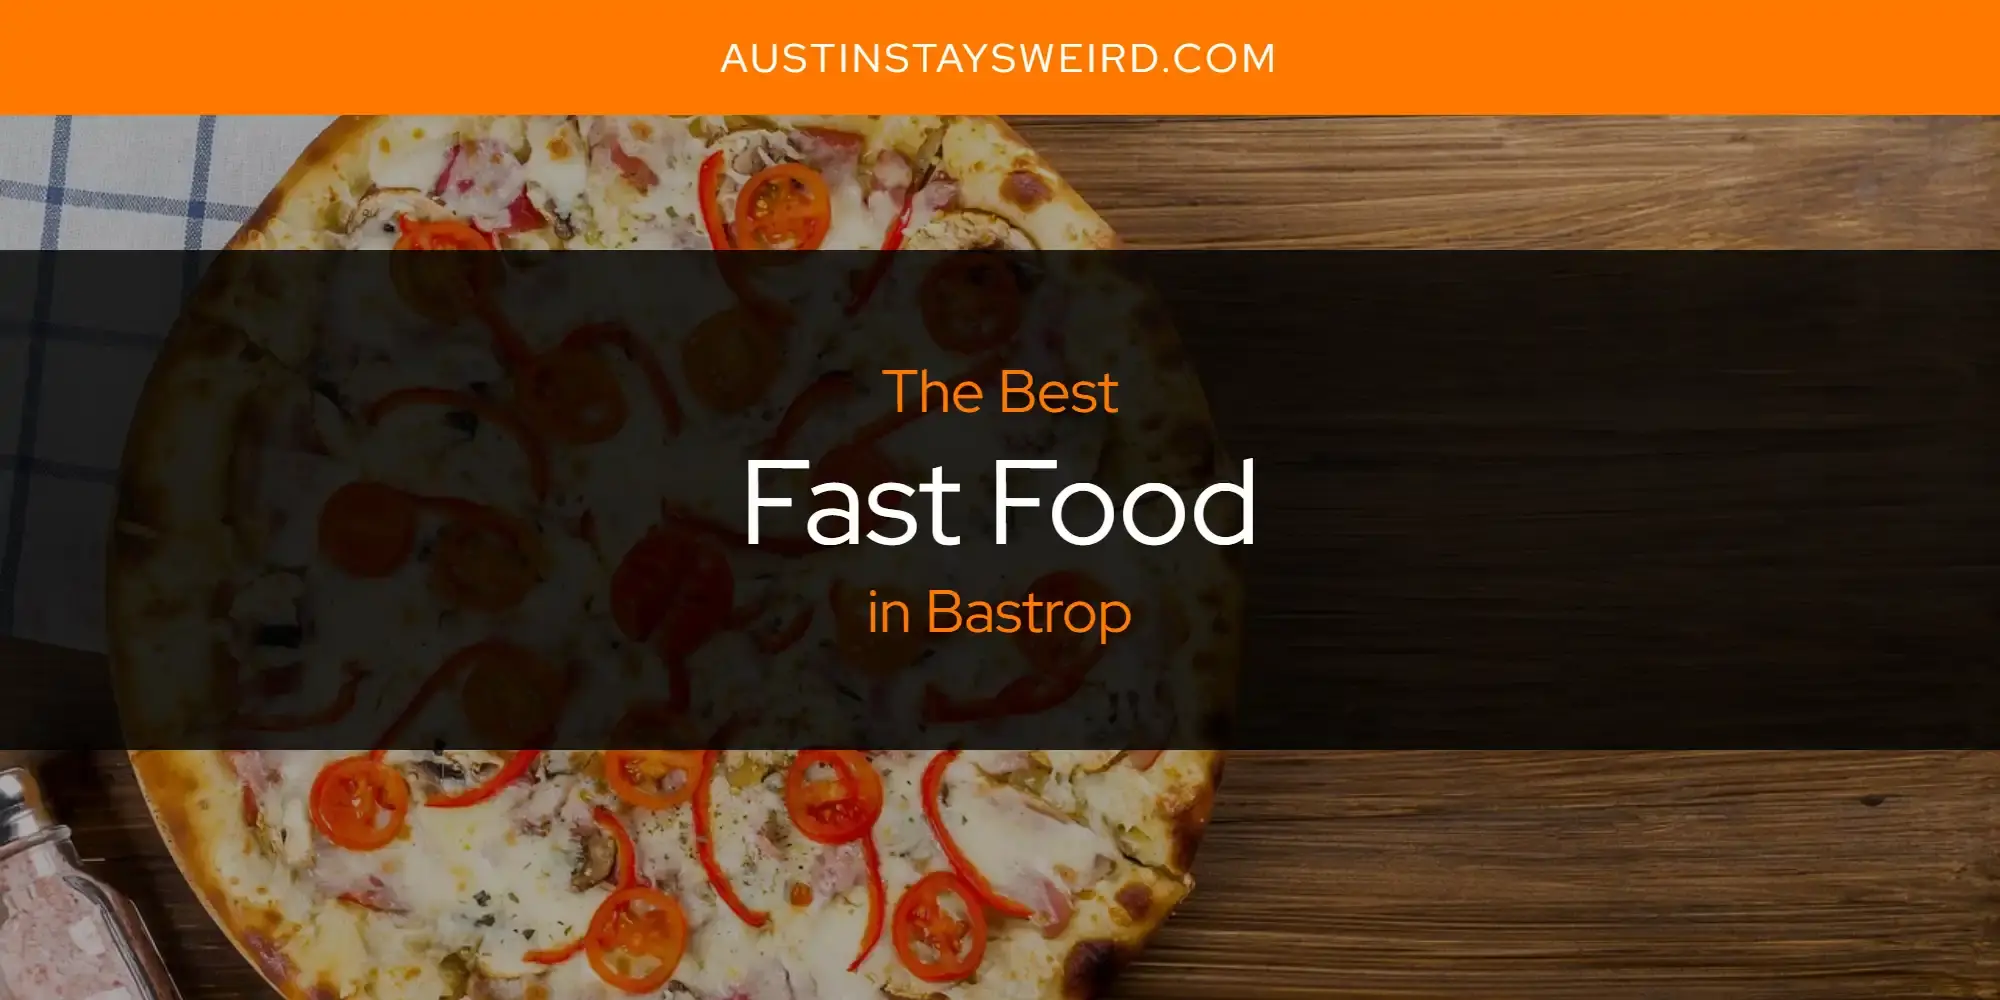 Best Fast Food in Bastrop? Here's the Top 8